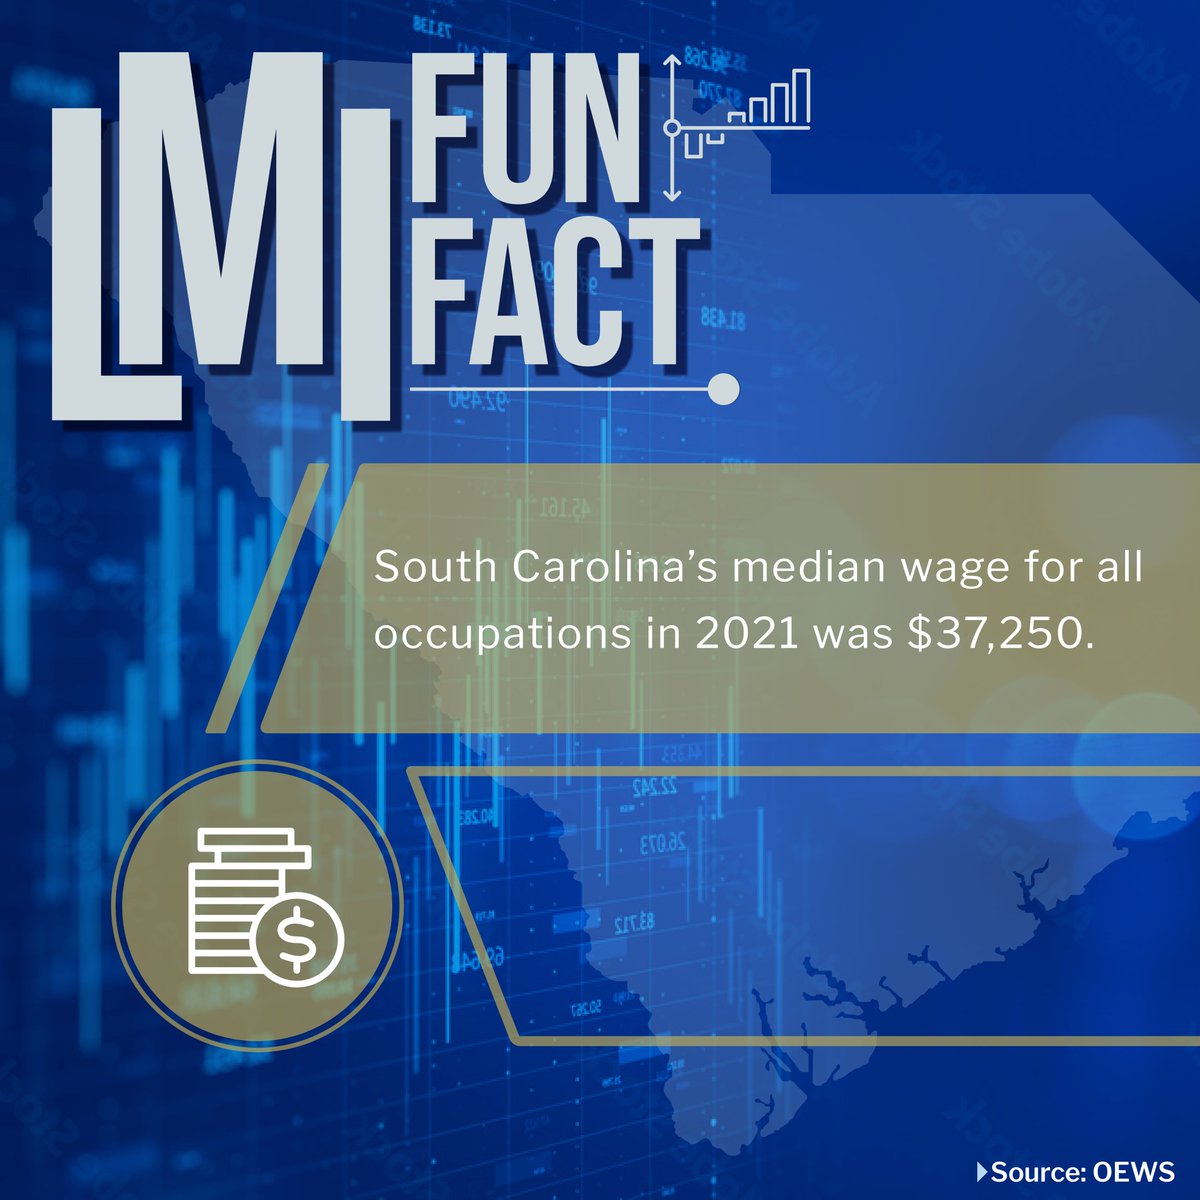 Workforce Development Month is here! Want more labor market information (LMI) outside of this fun fact? Register to attend LMI Insights webinars to learn more. #scwdm forms.office.com/g/zPDri3pNpr